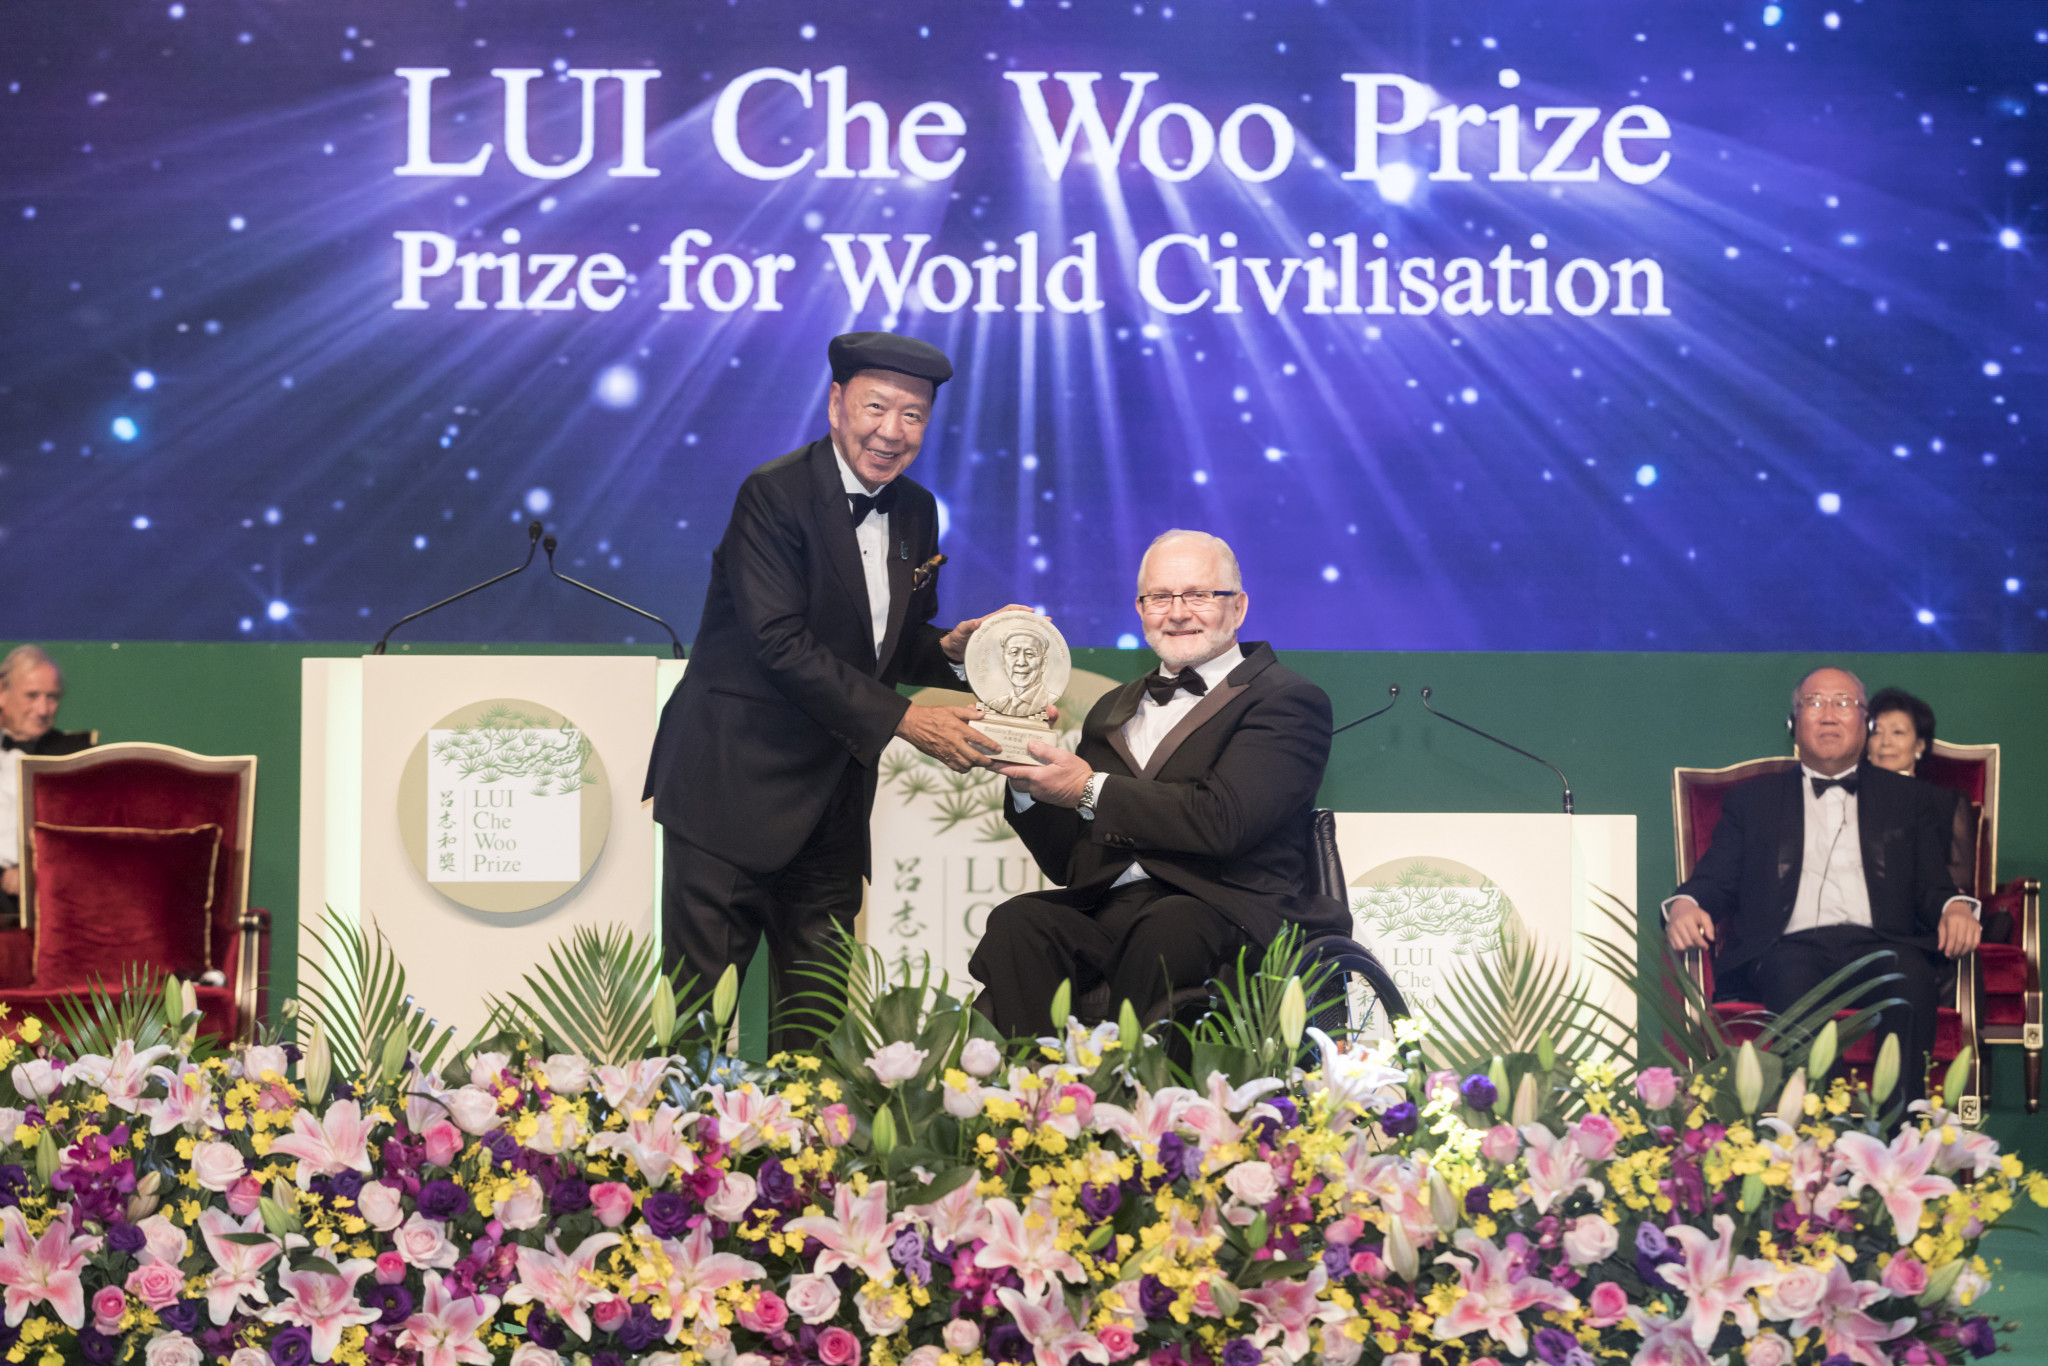 Former IPC President Sir Philip receives LUI Che Woo Prize